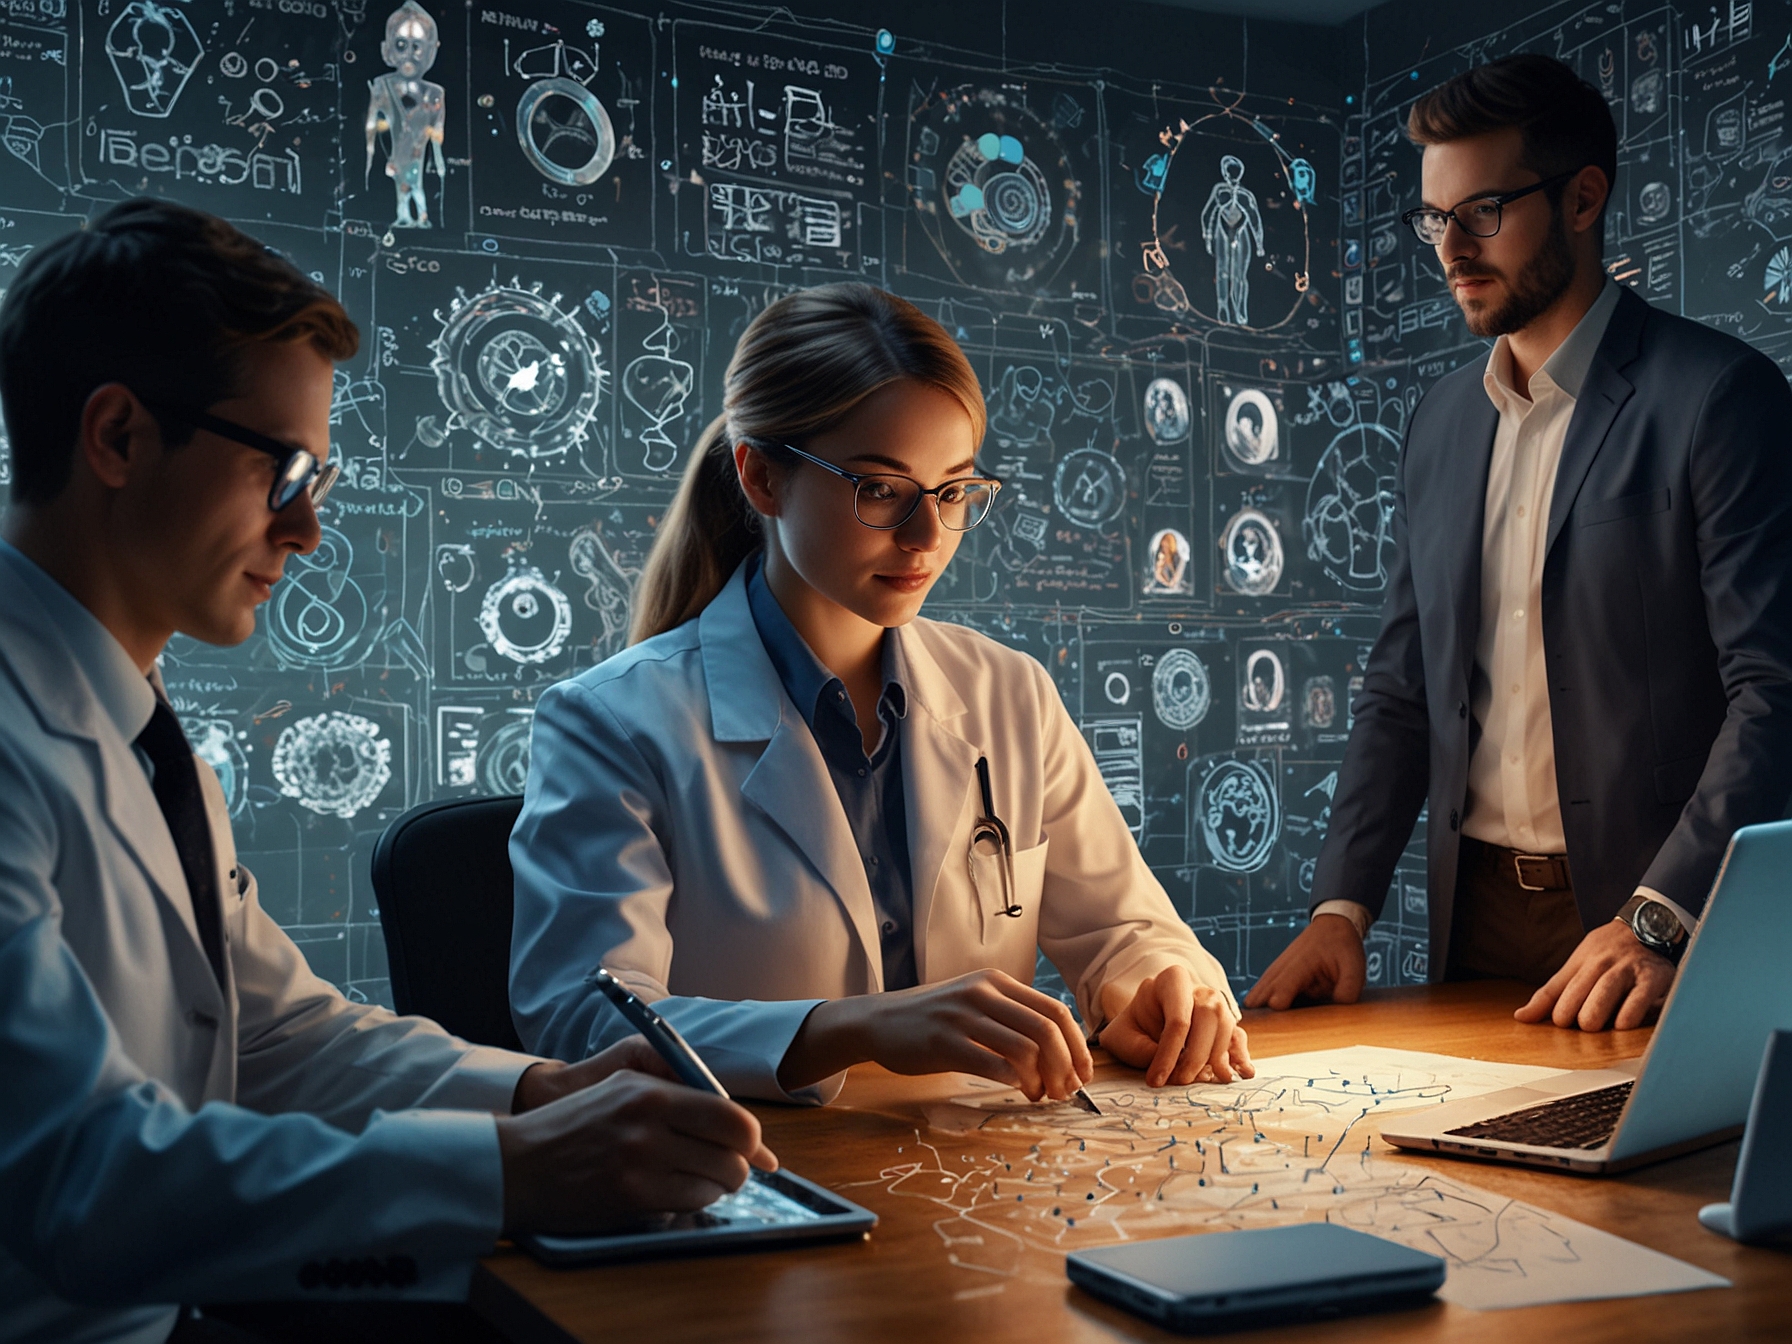 A depiction of diverse professionals working collaboratively in a tech-driven environment, showcasing the integration of AI in healthcare, finance, and manufacturing sectors to drive innovation.